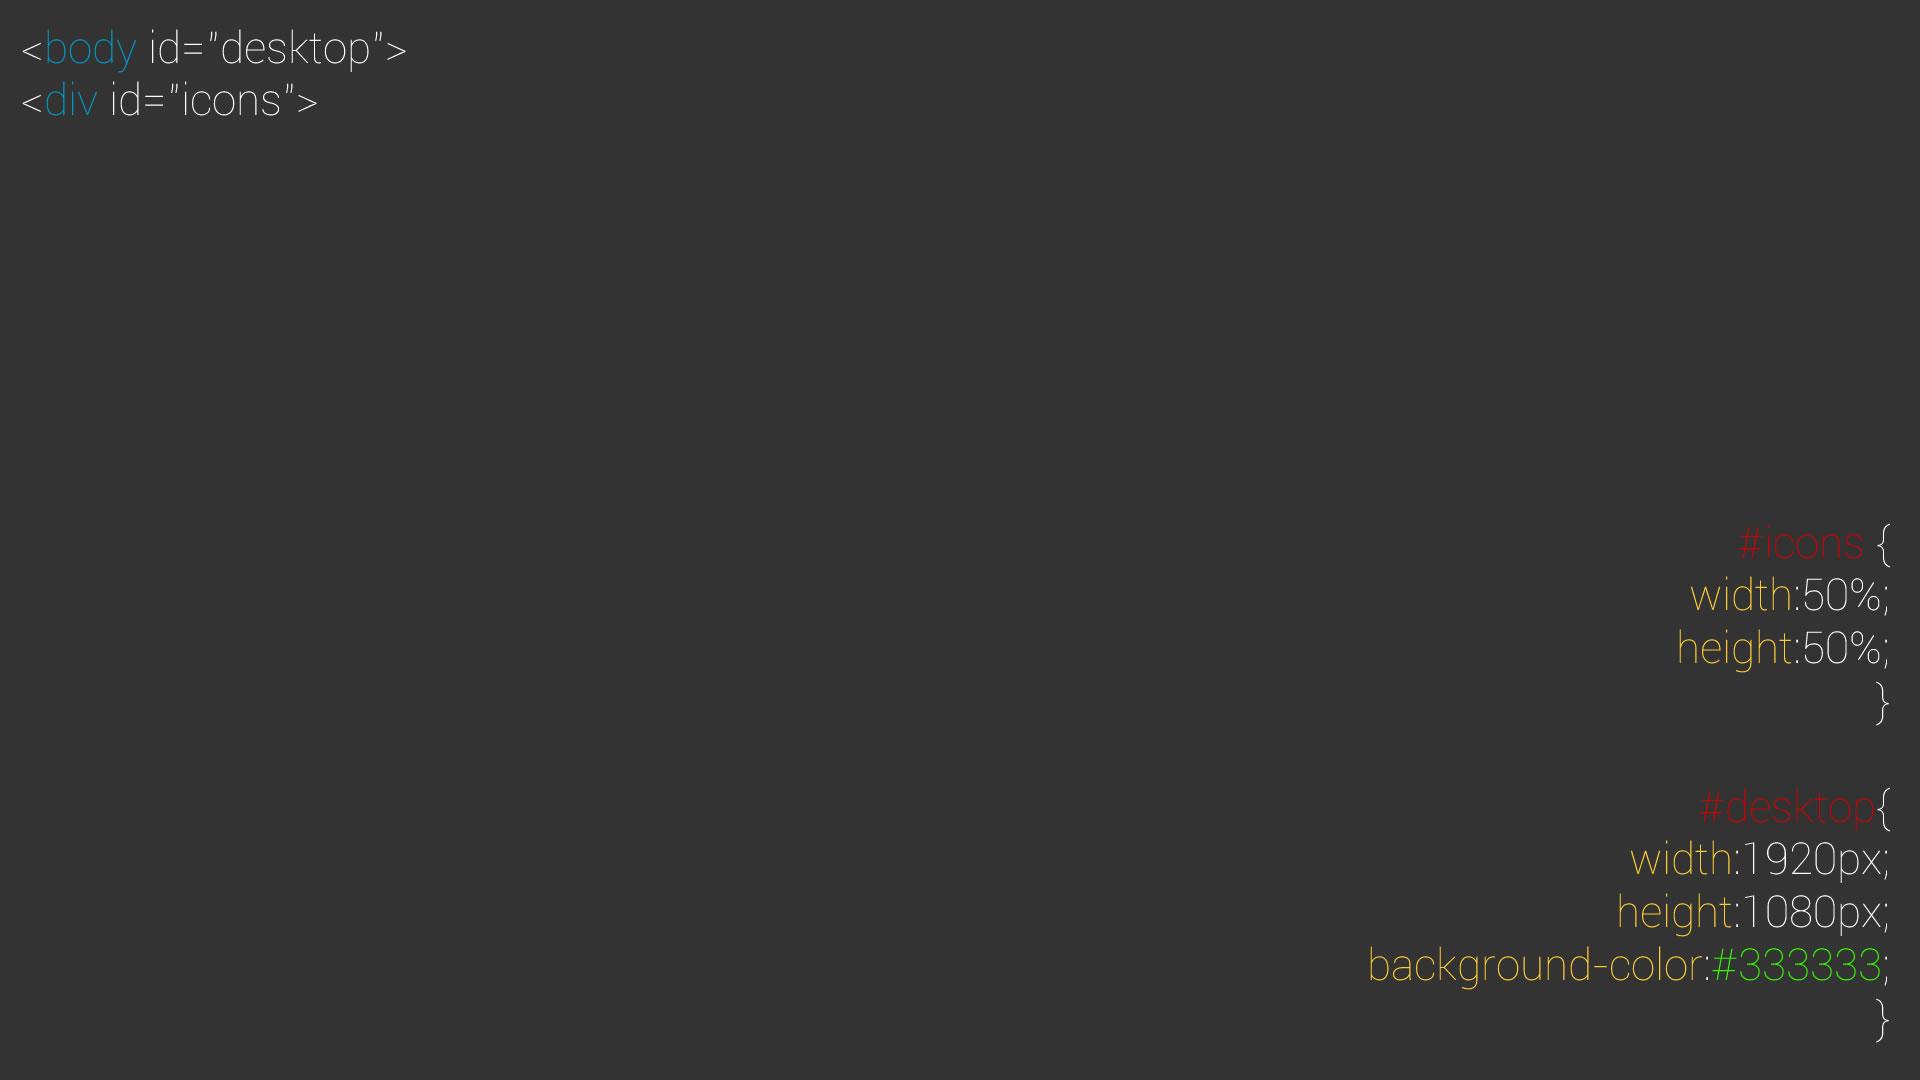 V2]Minimalist, Highlighted HTML CSS Code Style [1920x1080]